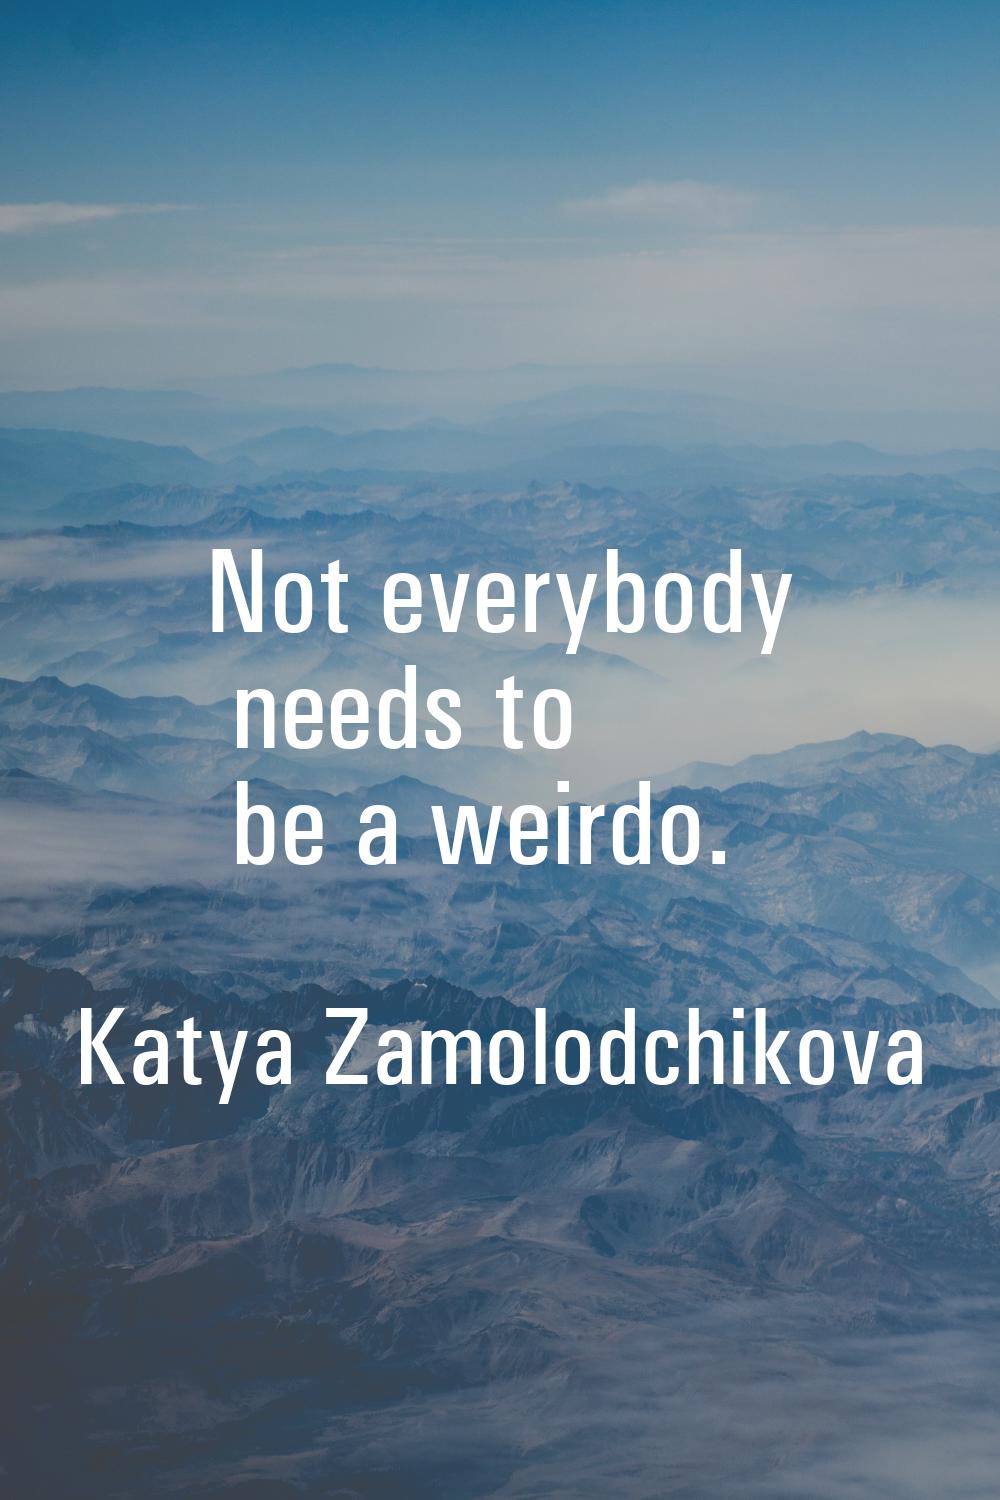 Not everybody needs to be a weirdo.